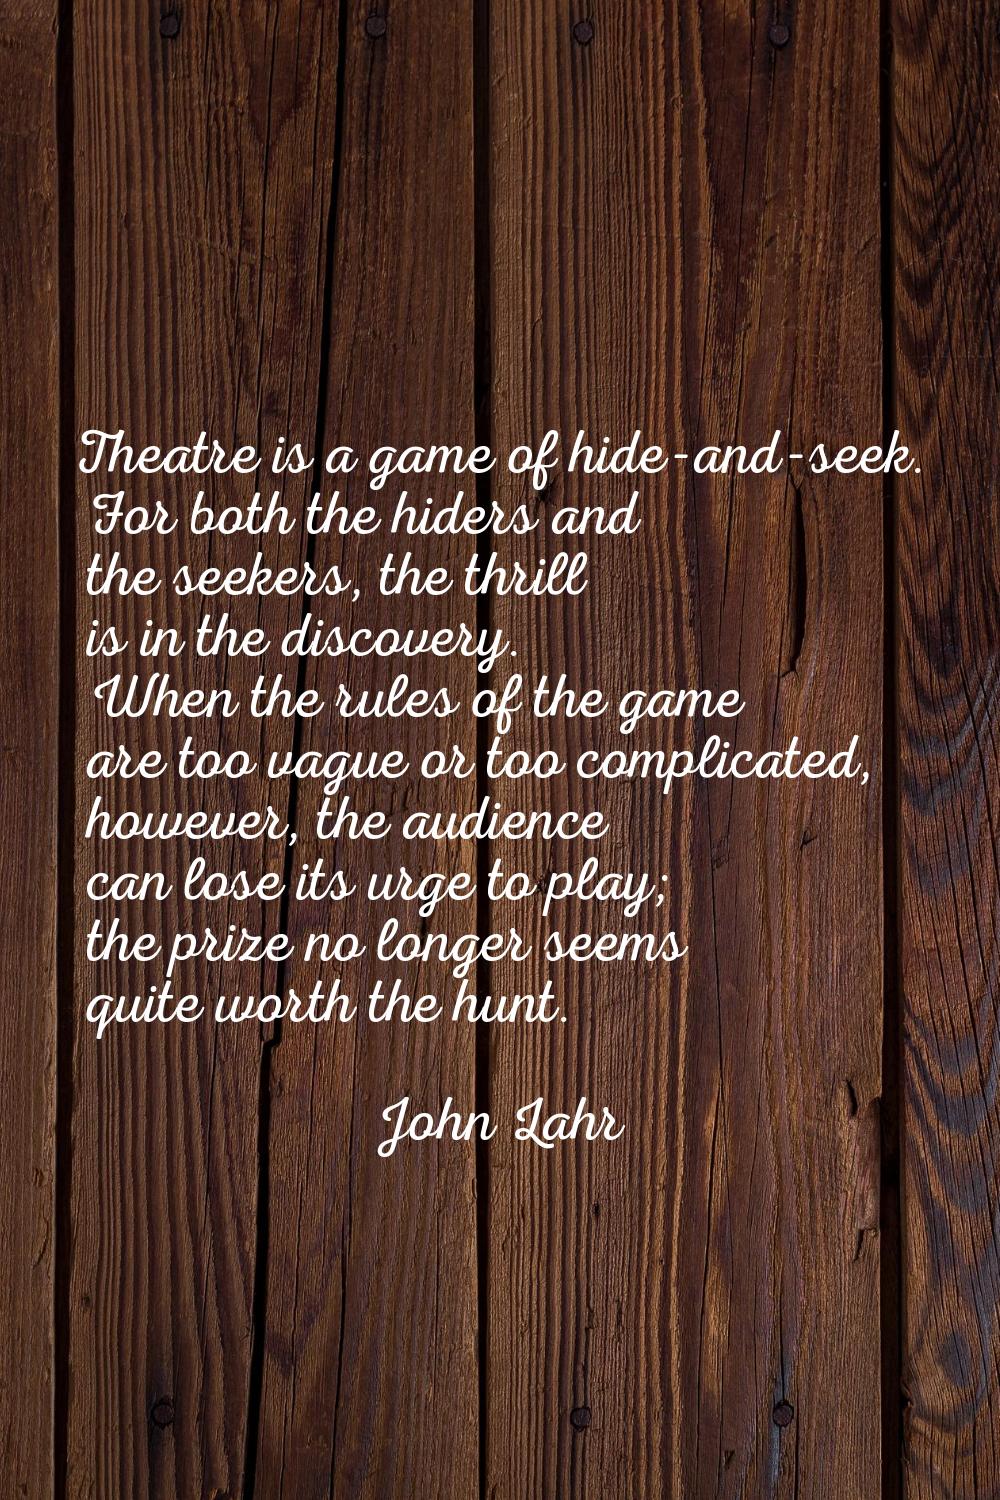 Theatre is a game of hide-and-seek. For both the hiders and the seekers, the thrill is in the disco